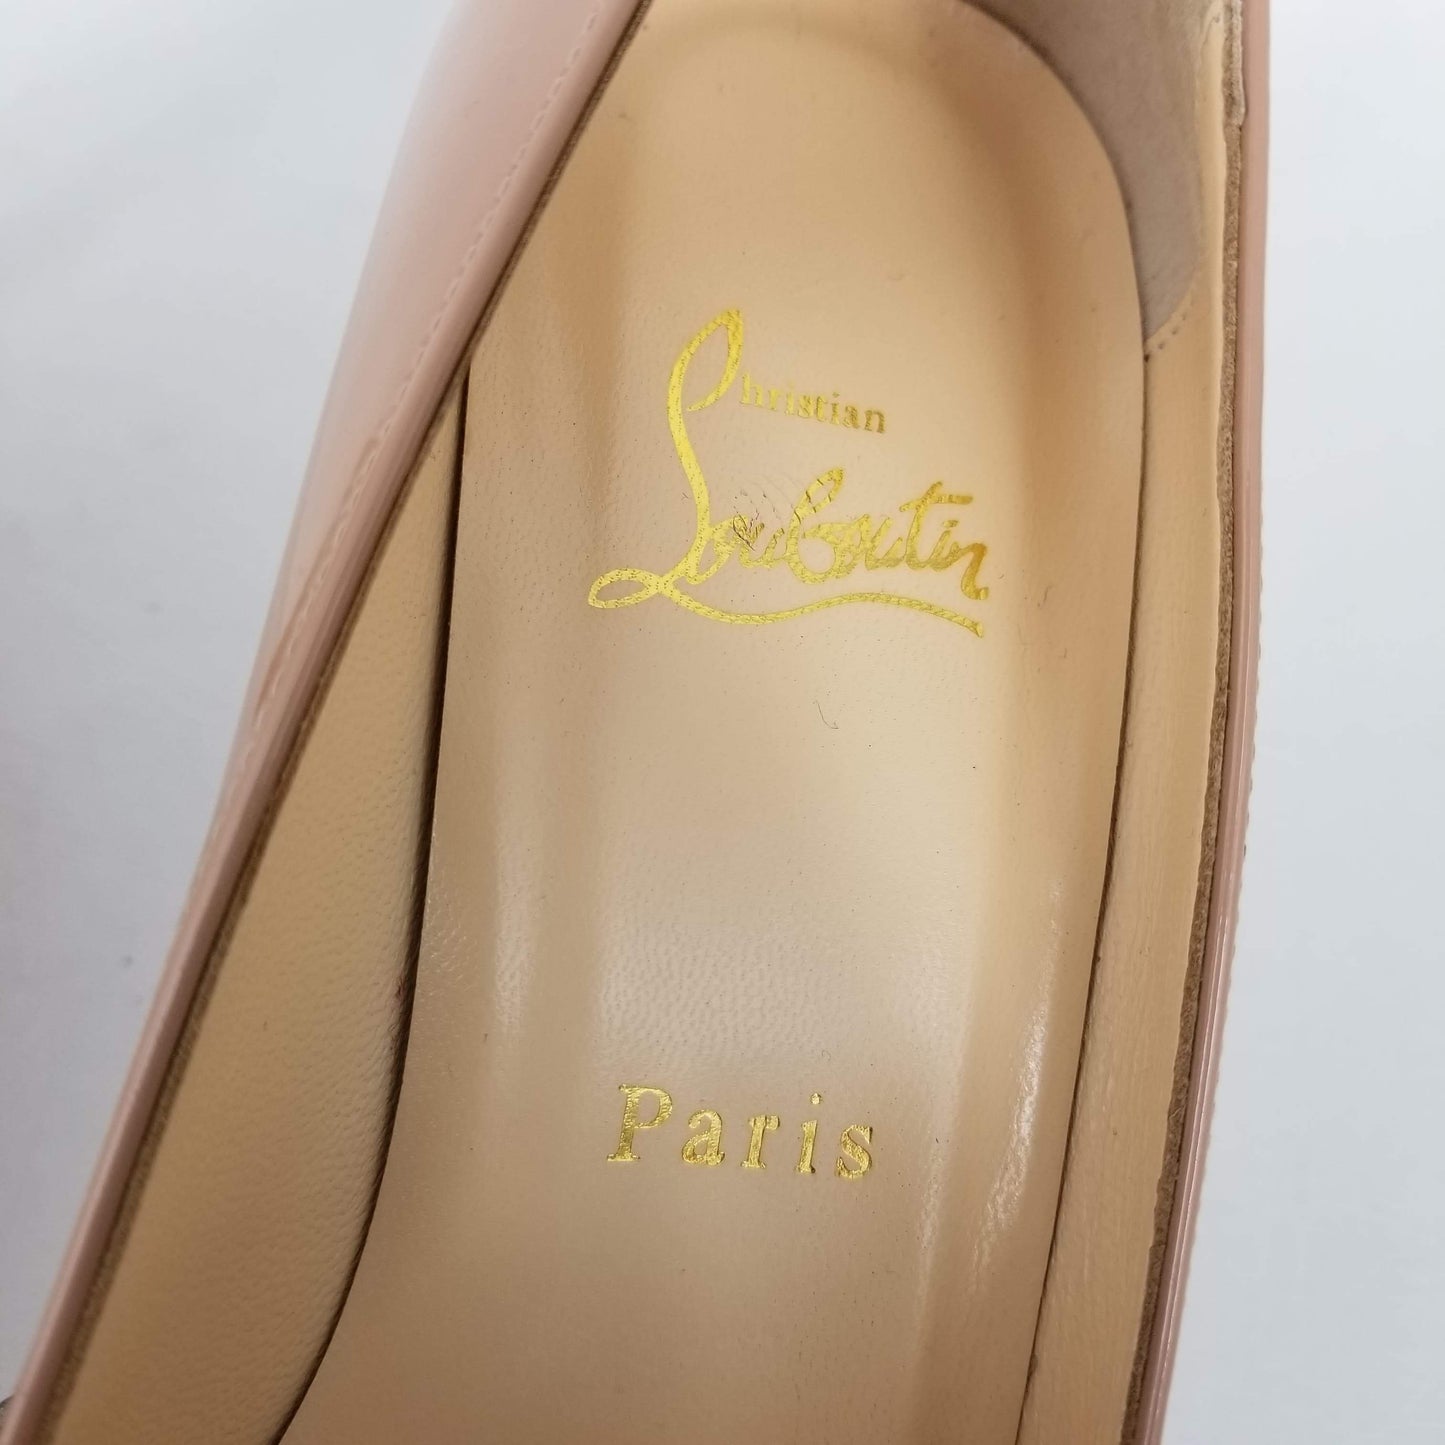 Authentic Christian Louboutin Nude Simple Pumps 80